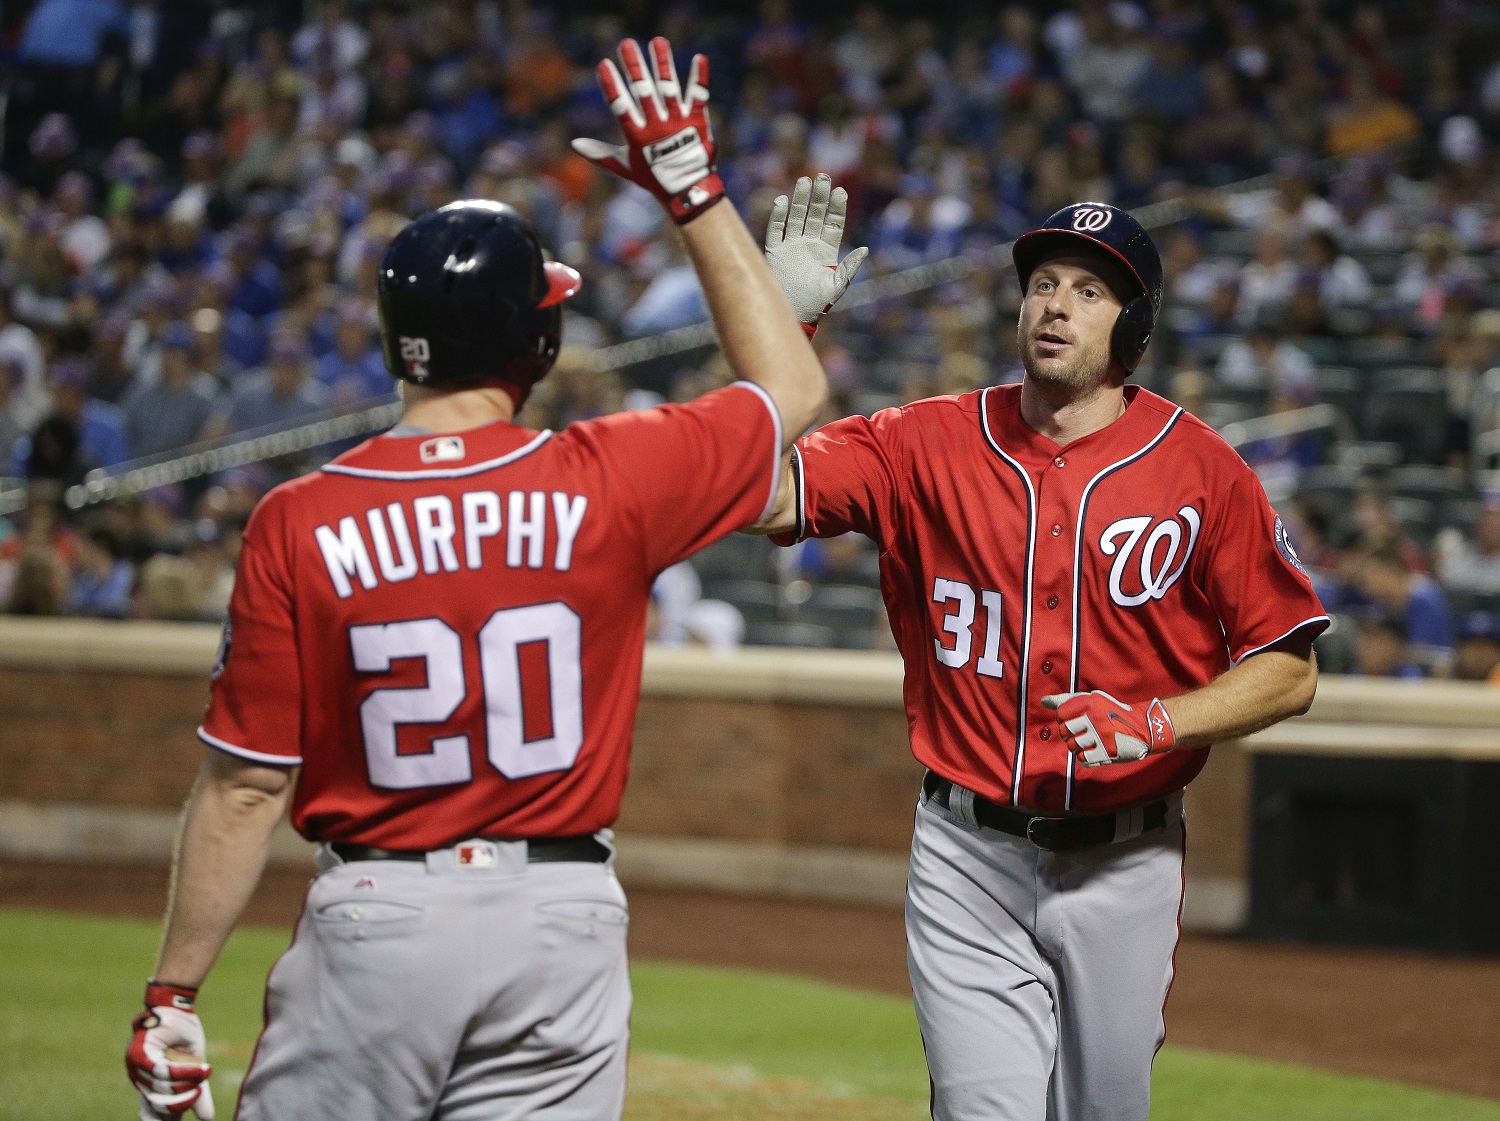 Washington Nationals' Max Scherzer (31) is greeted by Daniel Murphy (20) after scoring on a triple by Ben Revere during the third inning of a baseball game, Saturday, July 9, 2016, in New York. (AP Photo/Julie Jacobson)